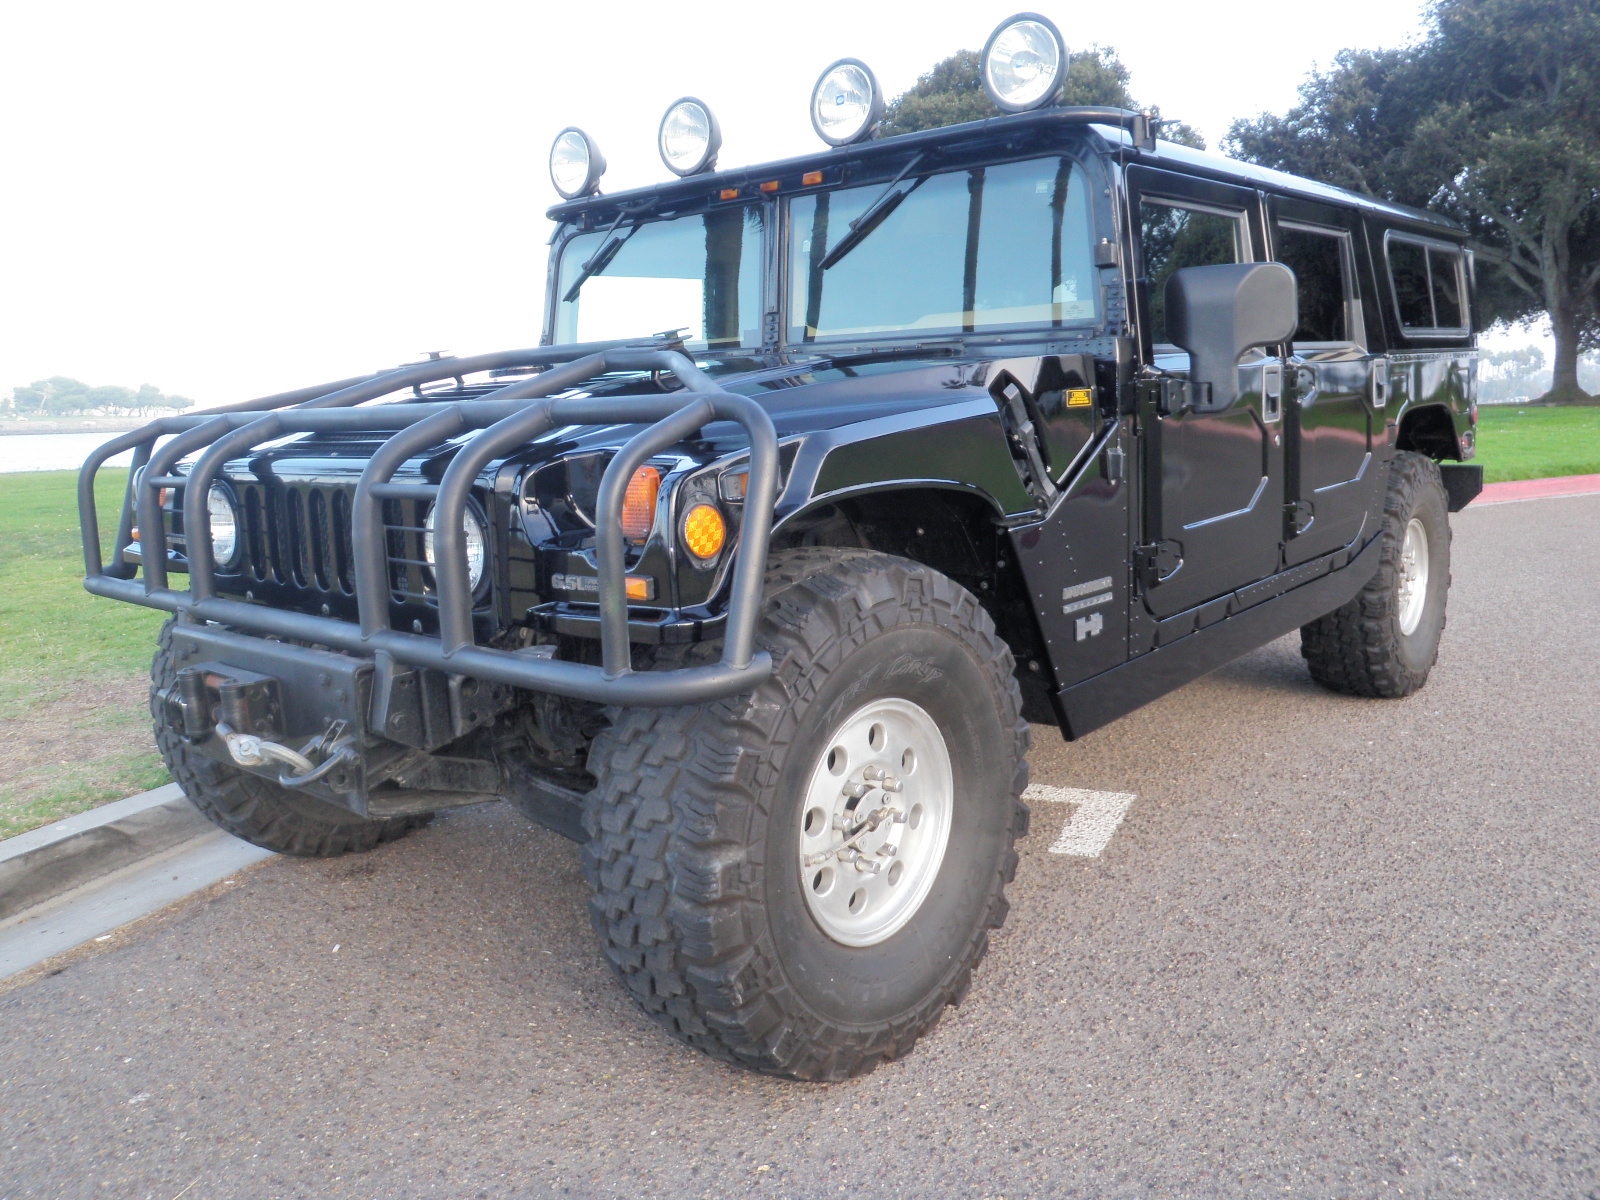 2001 hummer h1 wagon 33k miles, loaded with all the goodies …..sold